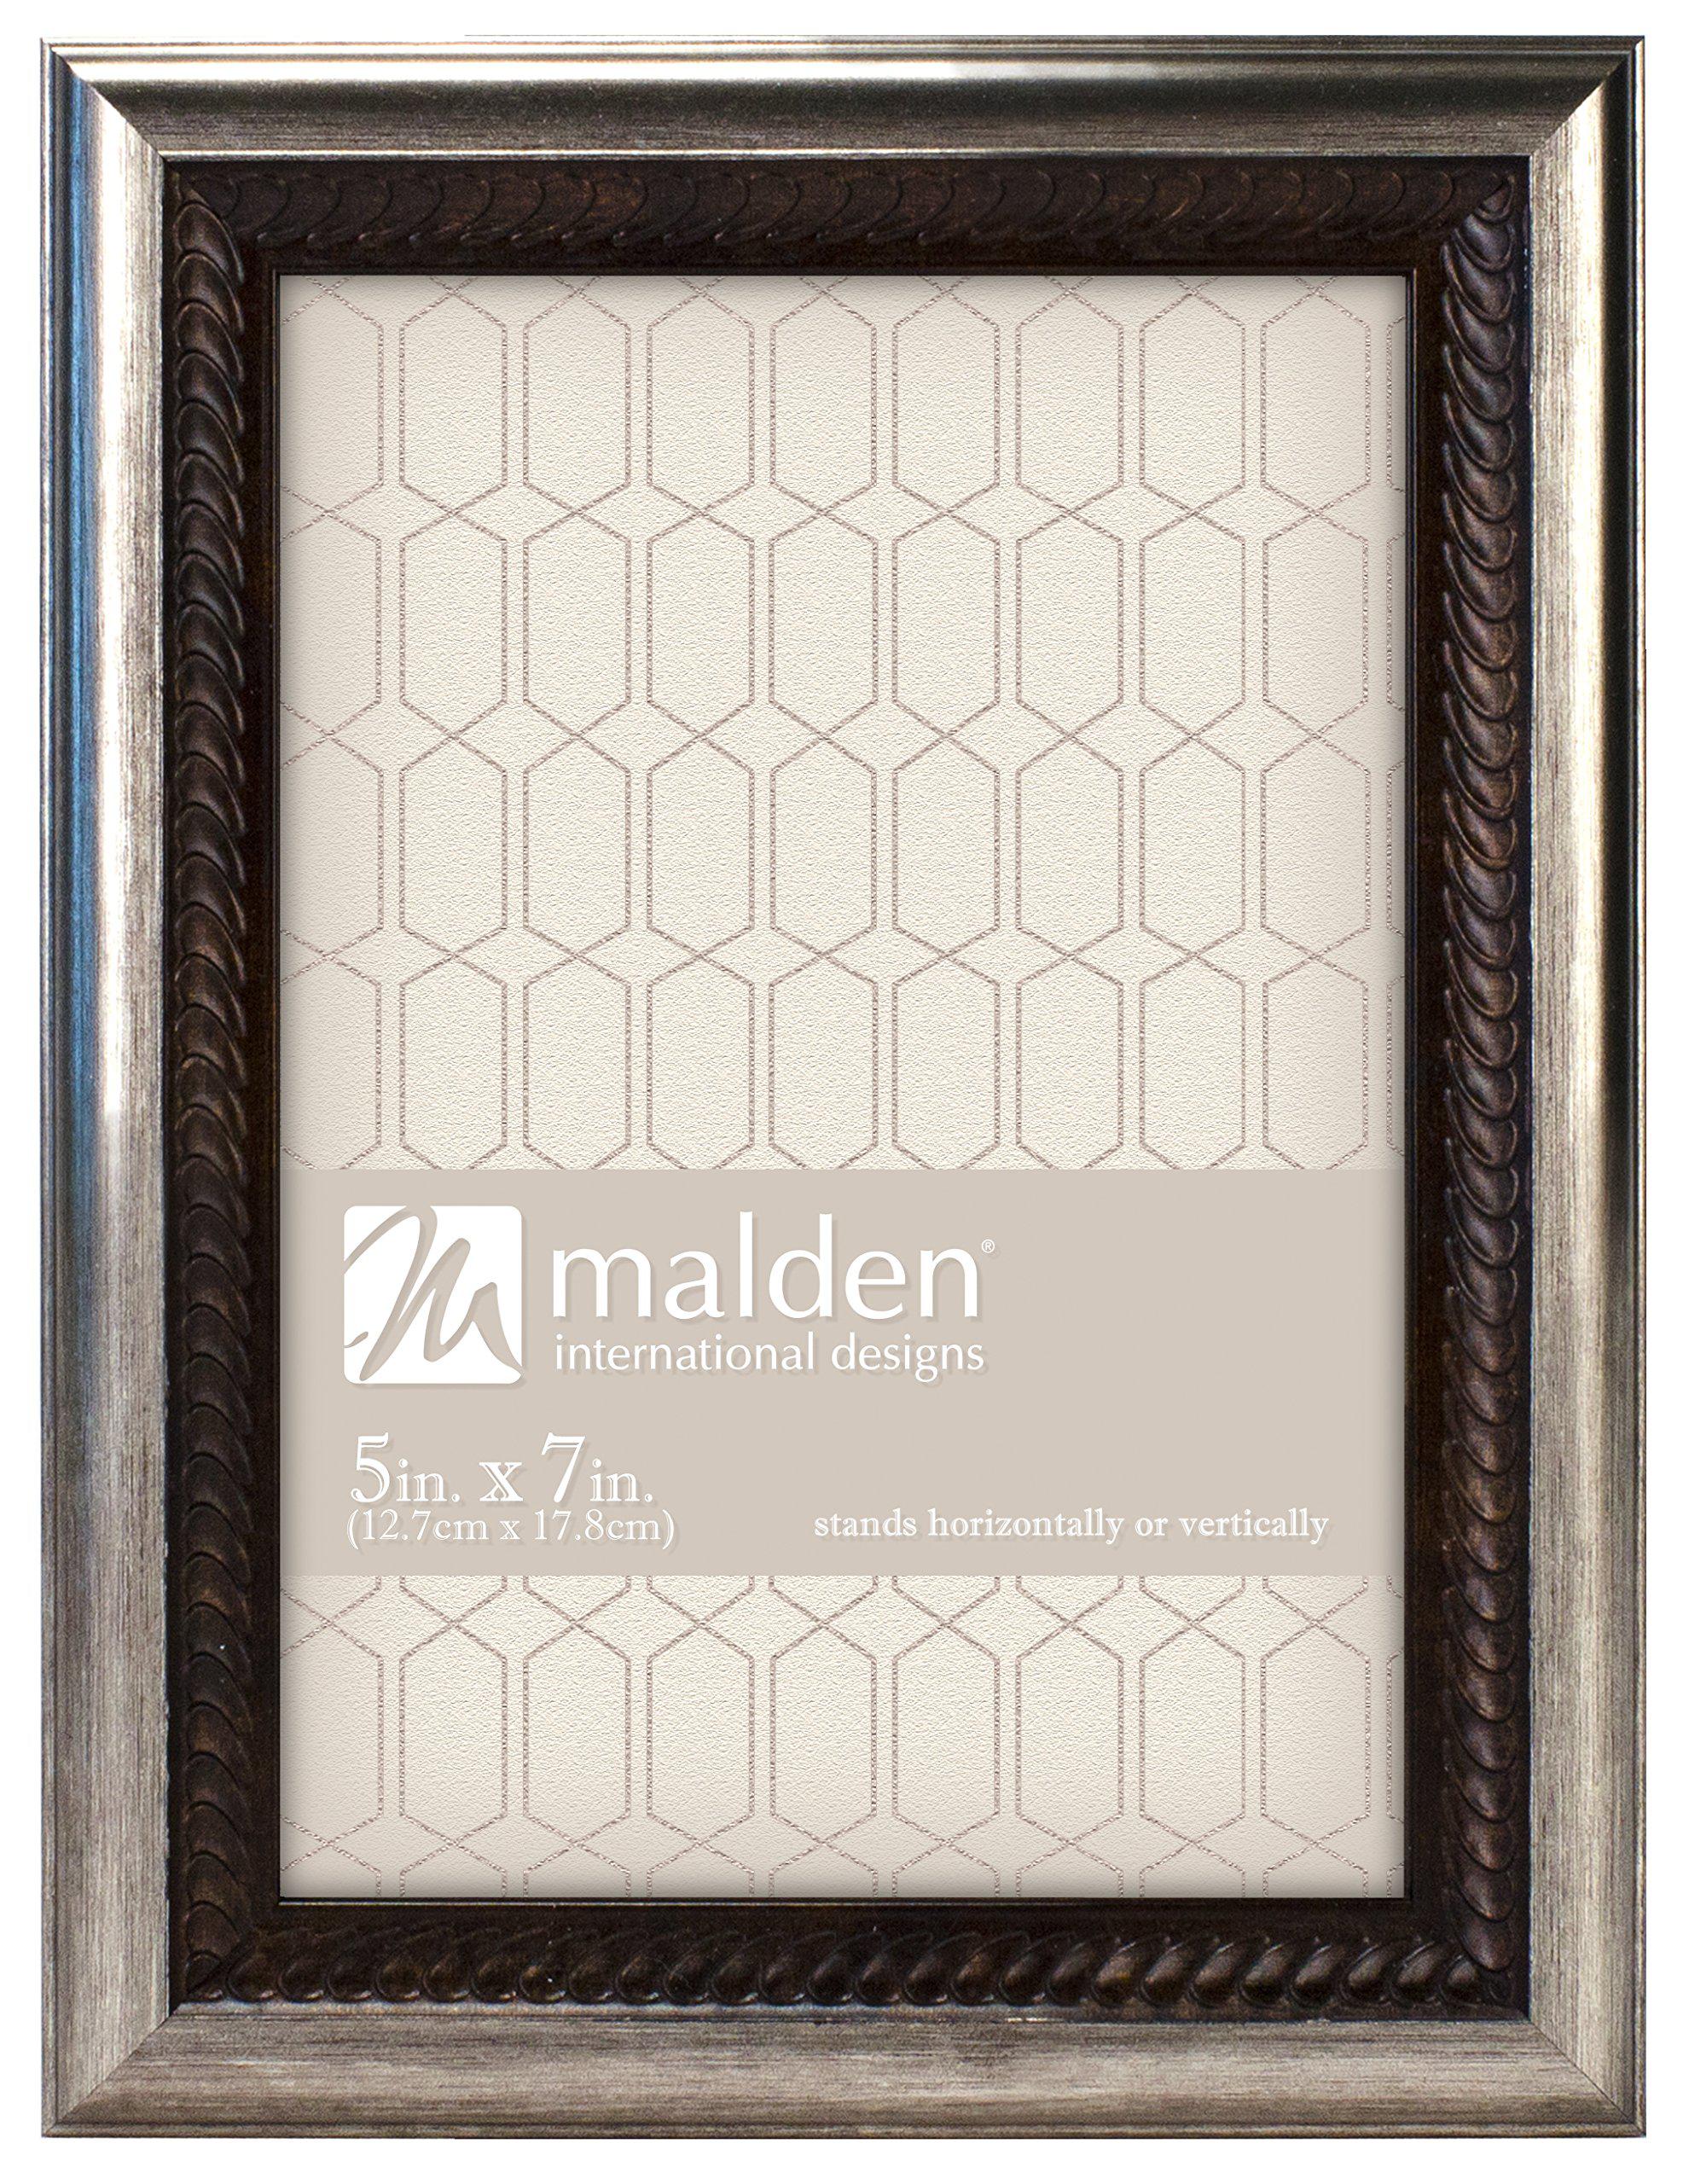 malden international designs classic mouldings brentwood bronze wave inner with outer picture frame, 5x7, silver